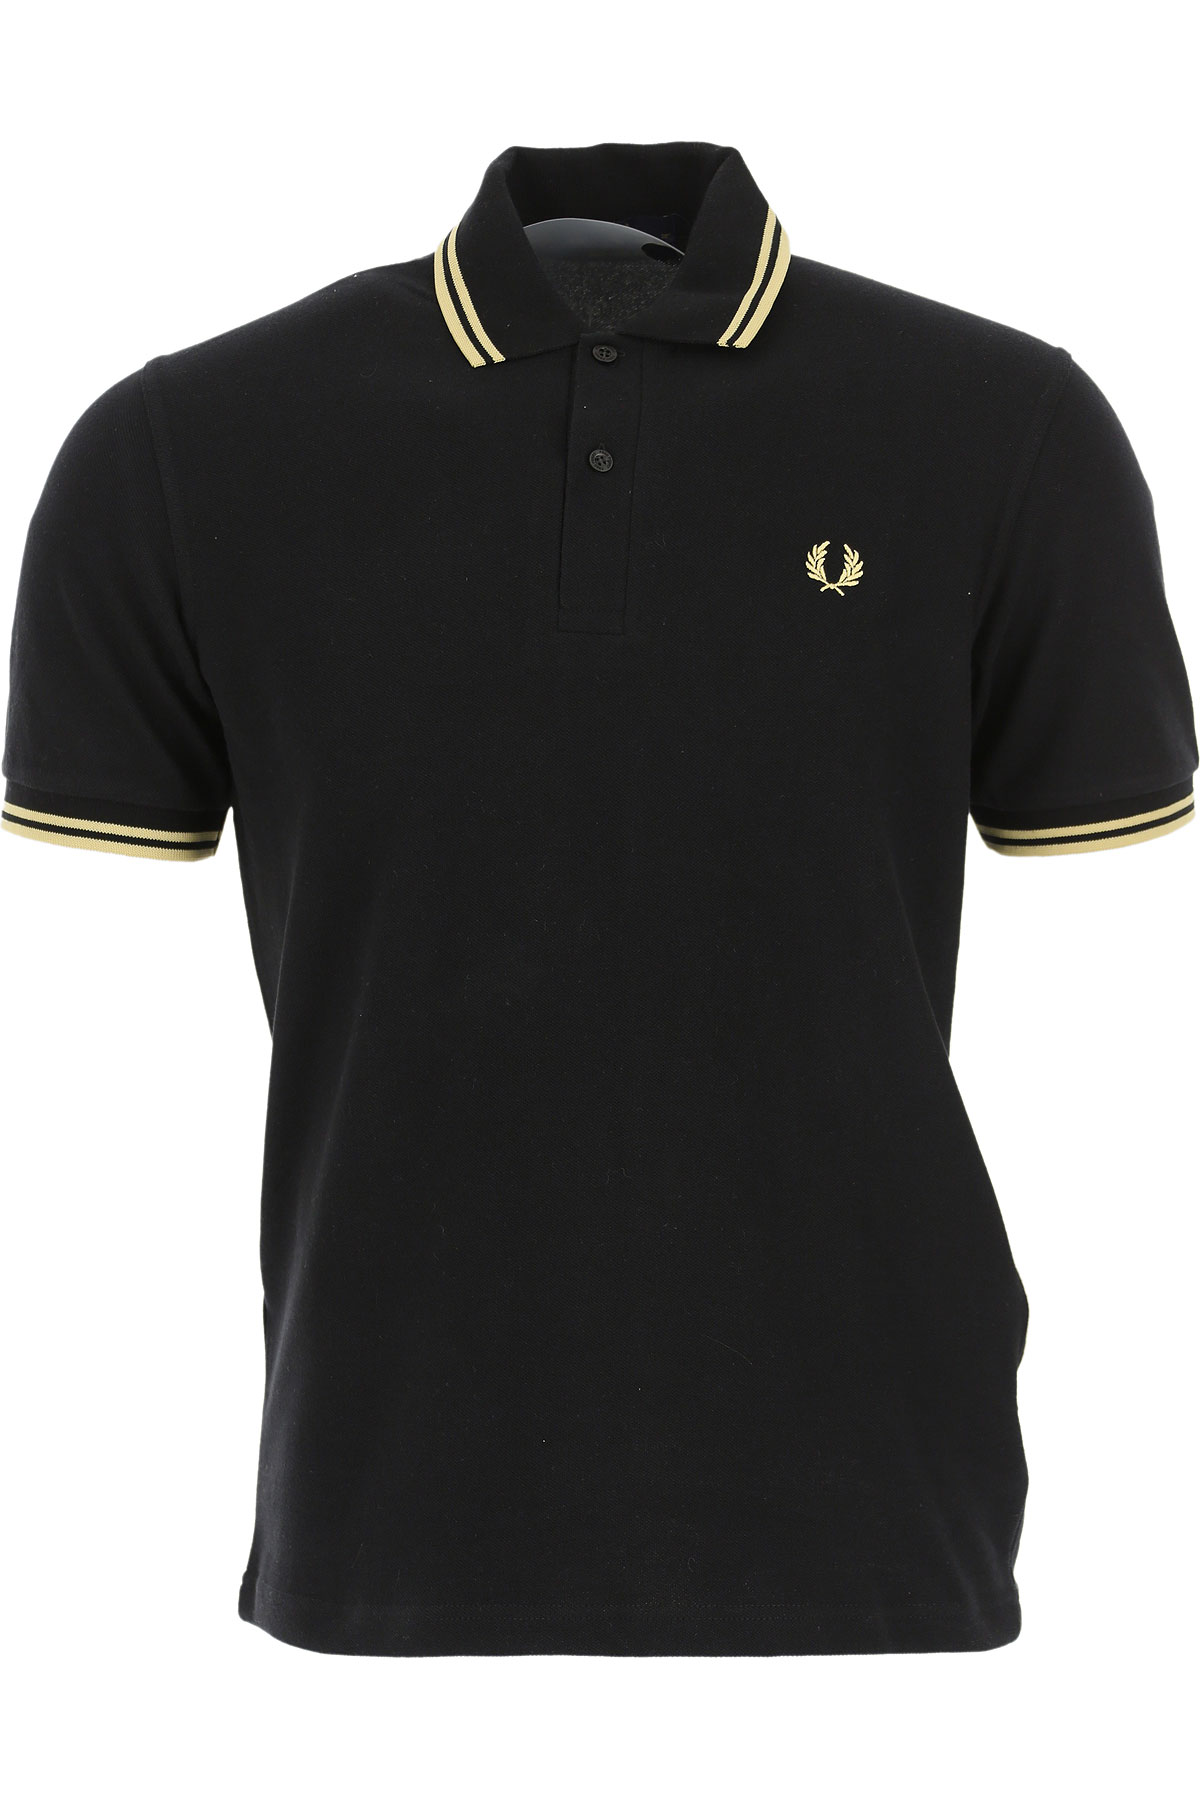 Mens Clothing Fred Perry, Style code: pm229-157-